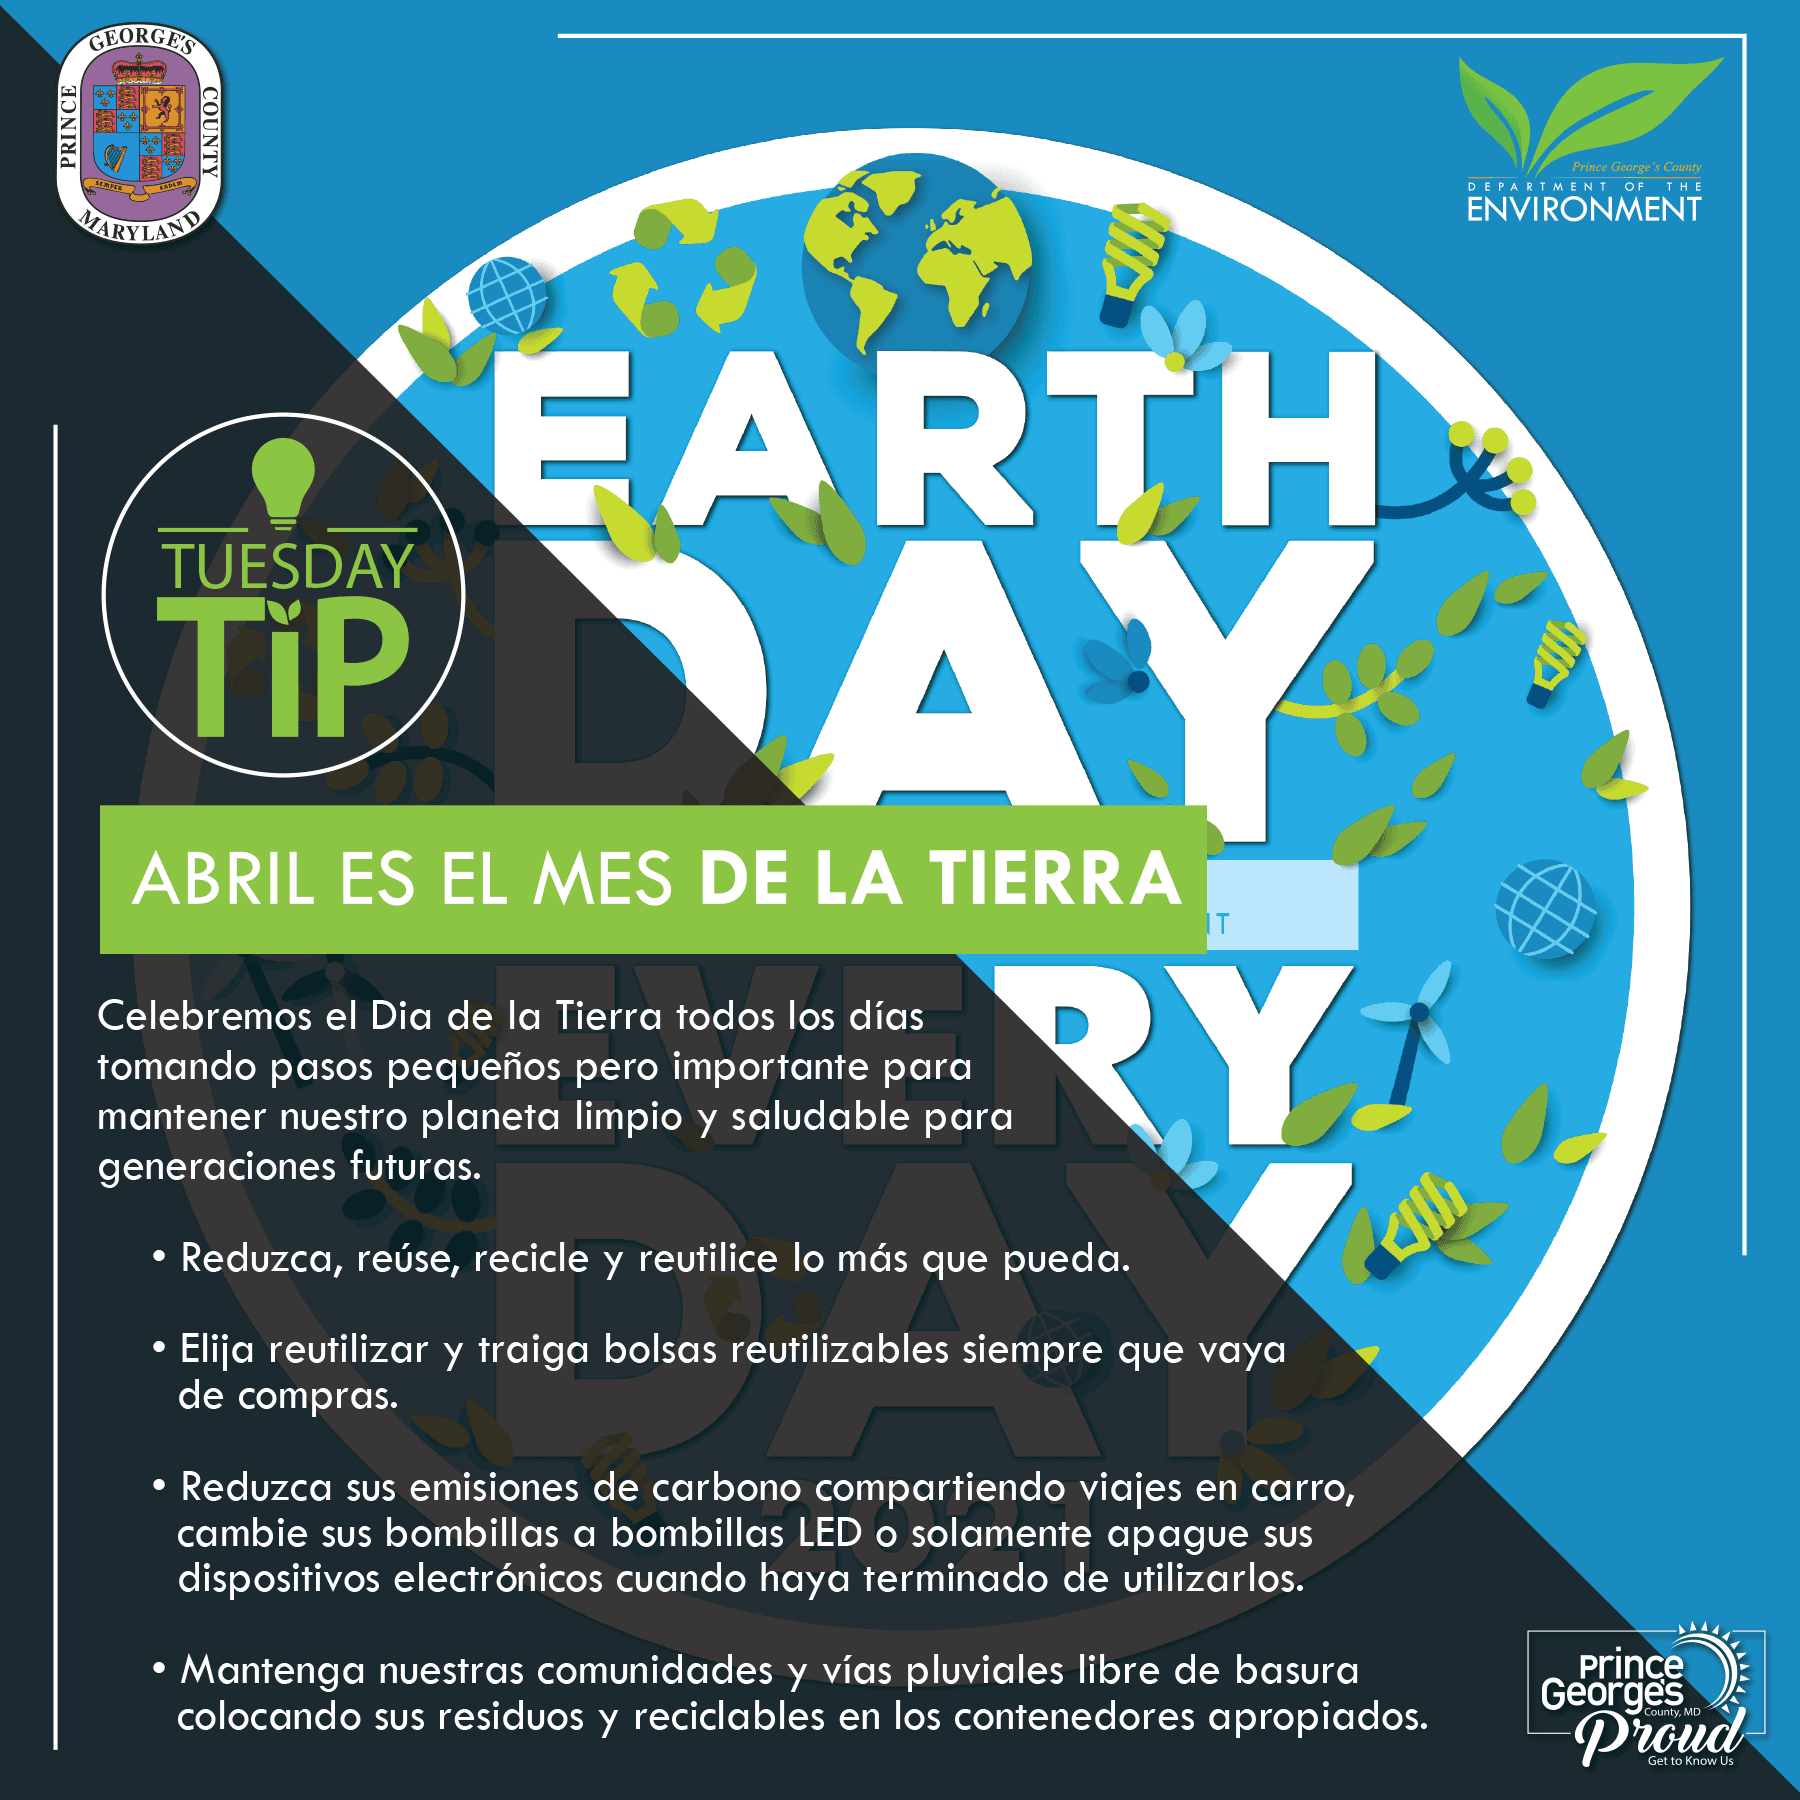 Tues Tip 3.30.21 Earth Month sp